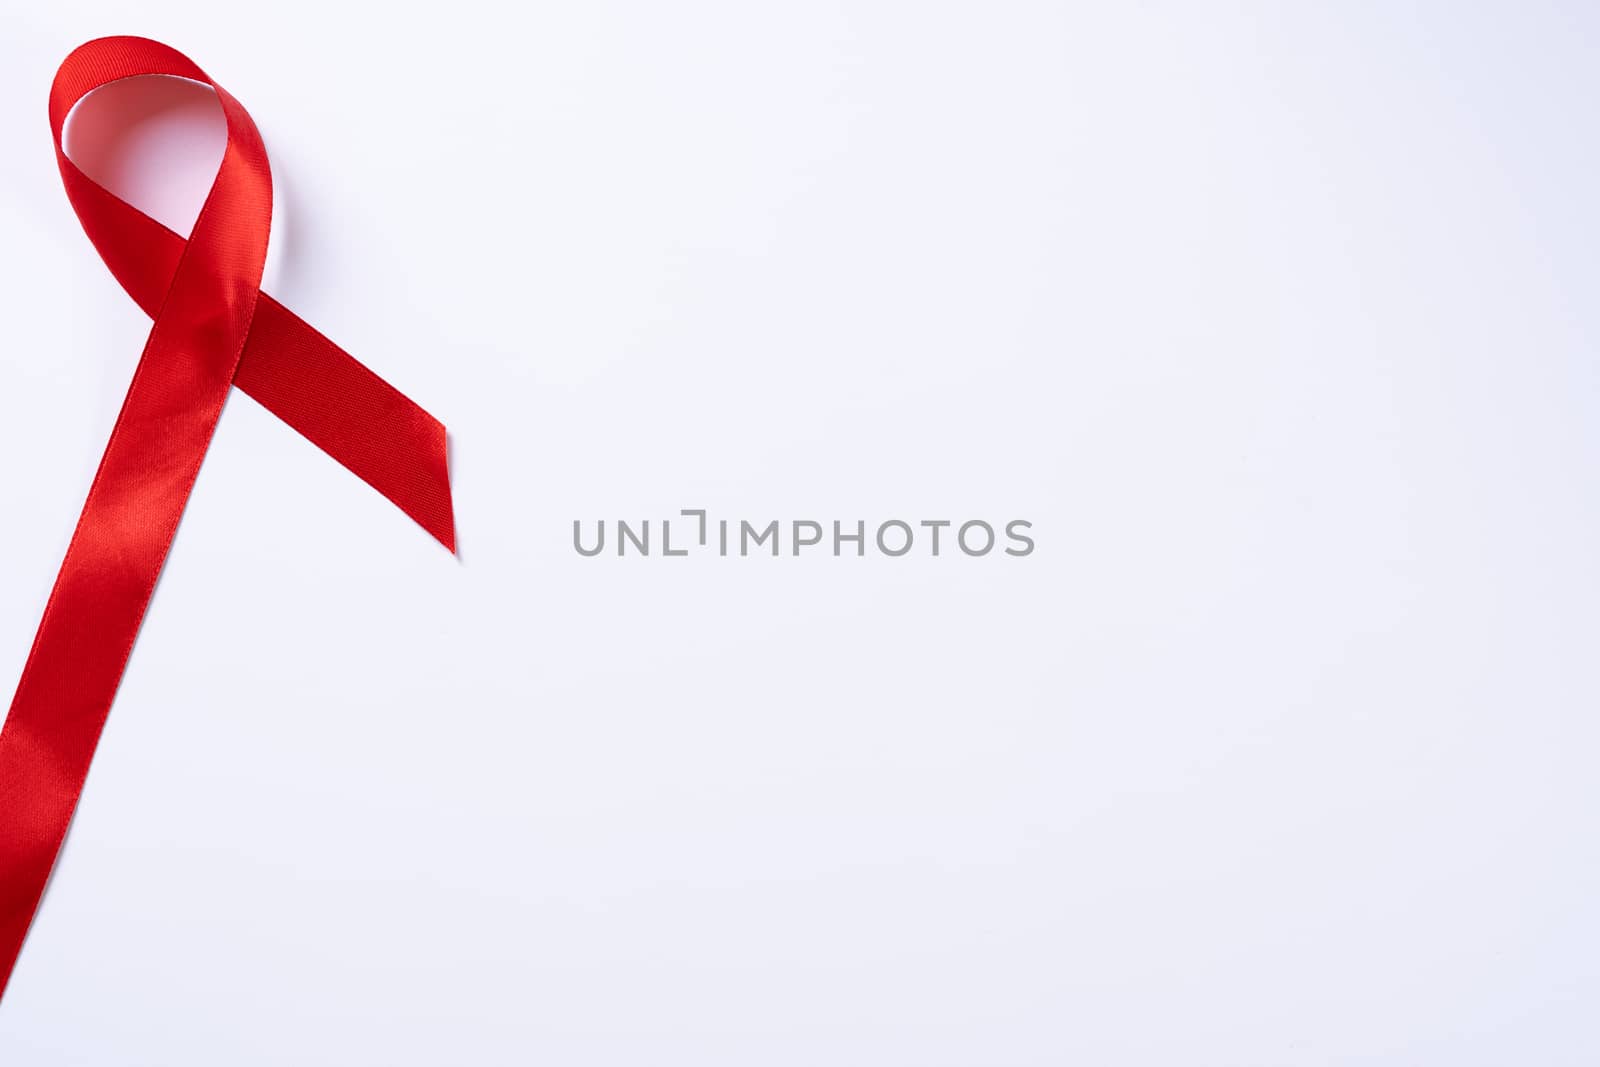 Aids awareness, red ribbon on white background with copy space for text. World Aids Day, Healthcare and medical concept. by mikesaran